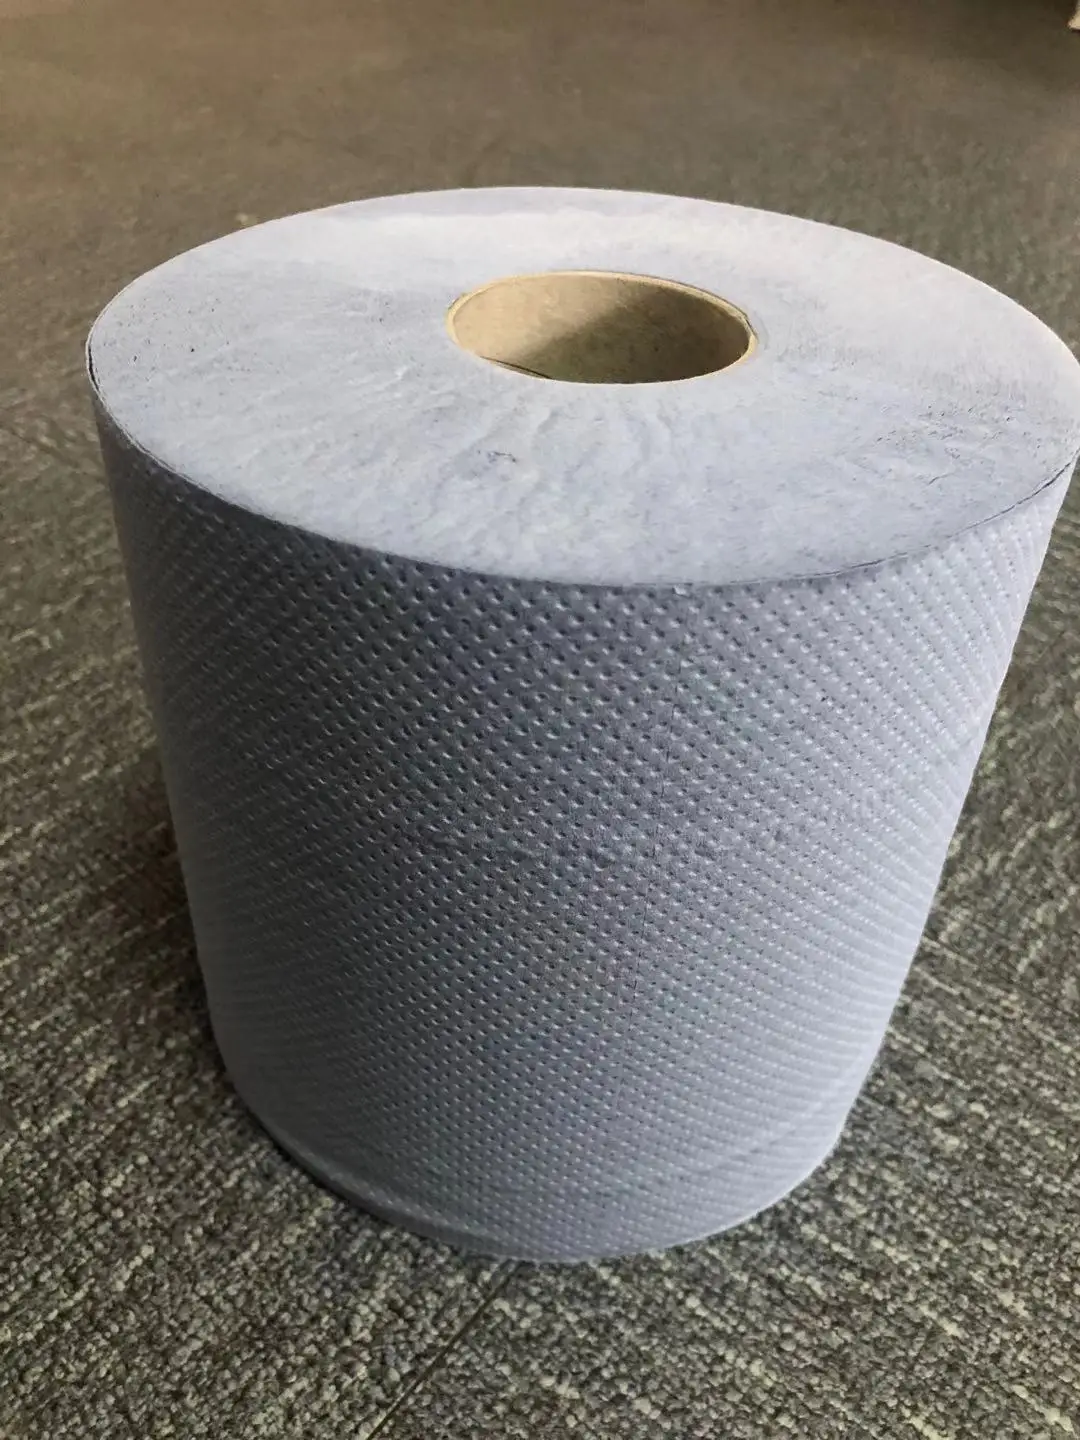 30 rolls 5x6pack blue rolls,centre feed,paper towel,industrial roll,paper tissue 